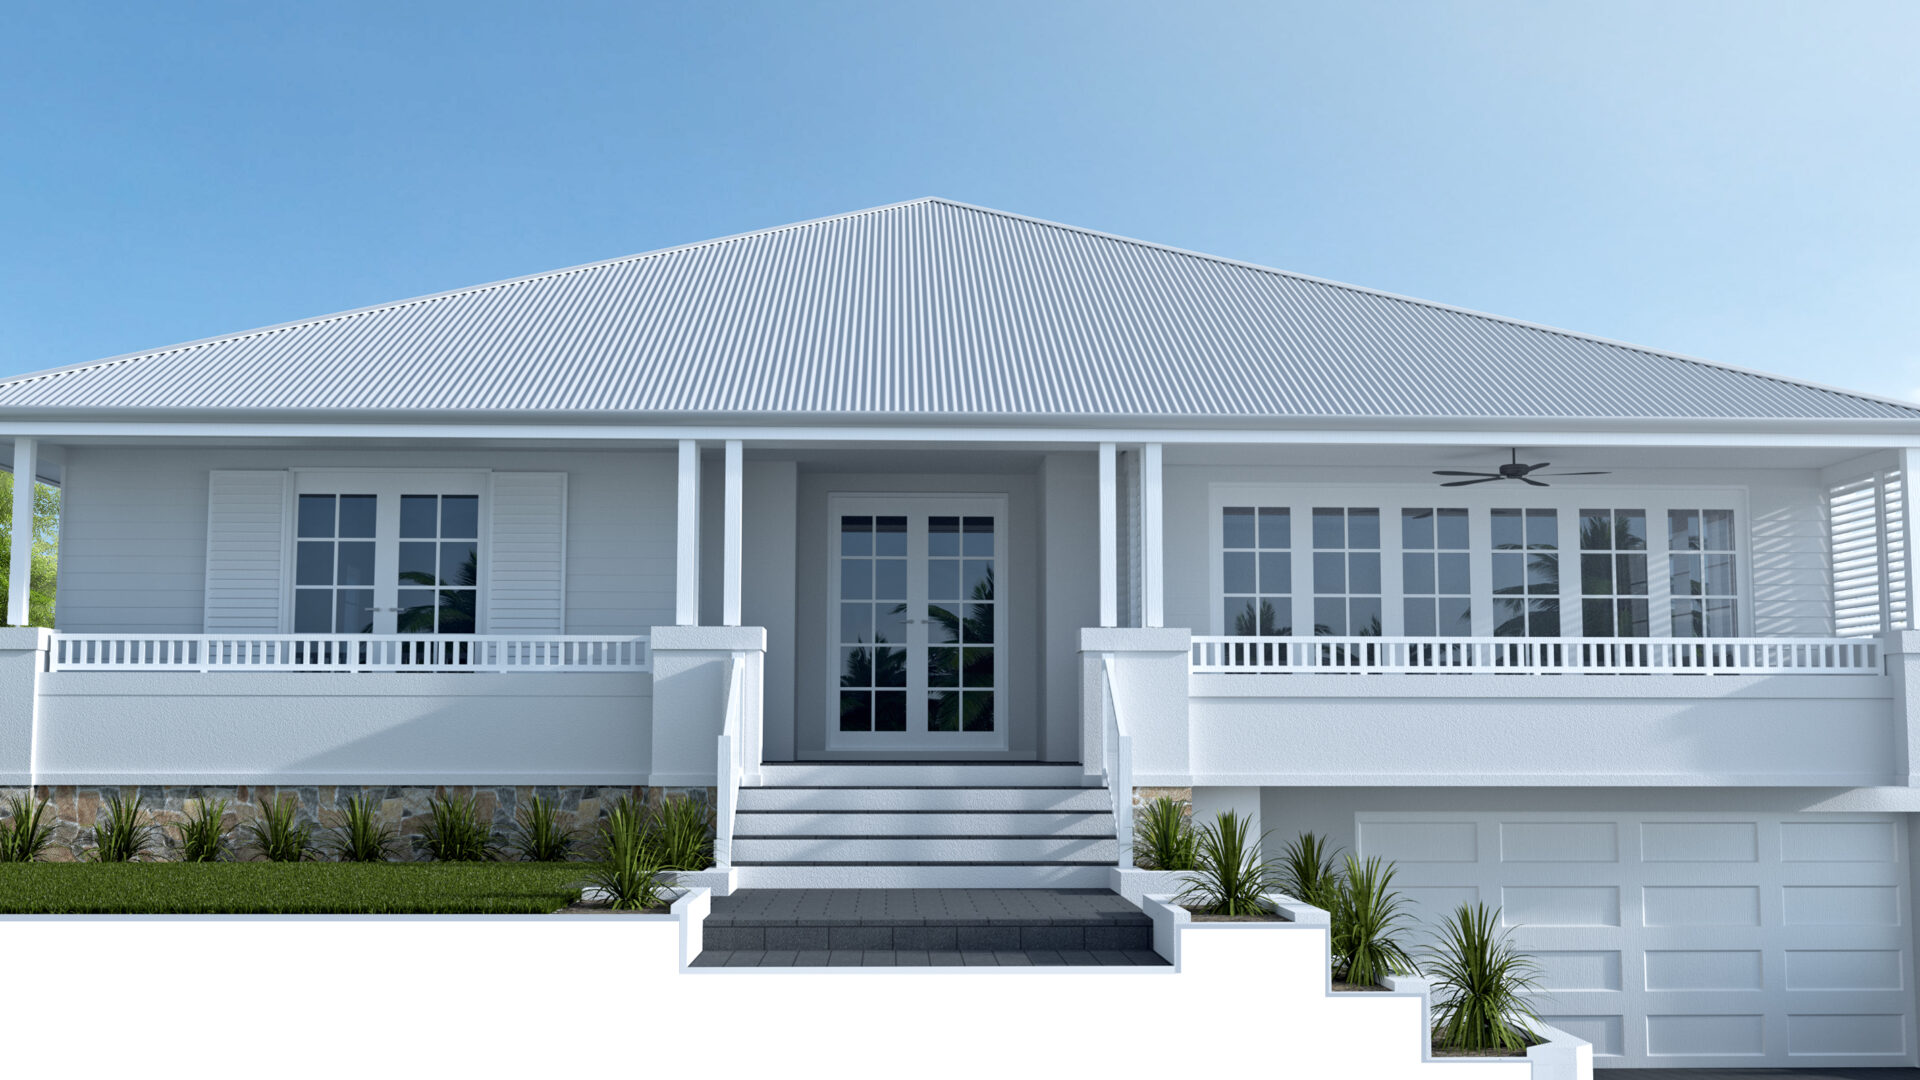 The Classique Luxury Hamptons Style Home Perth render